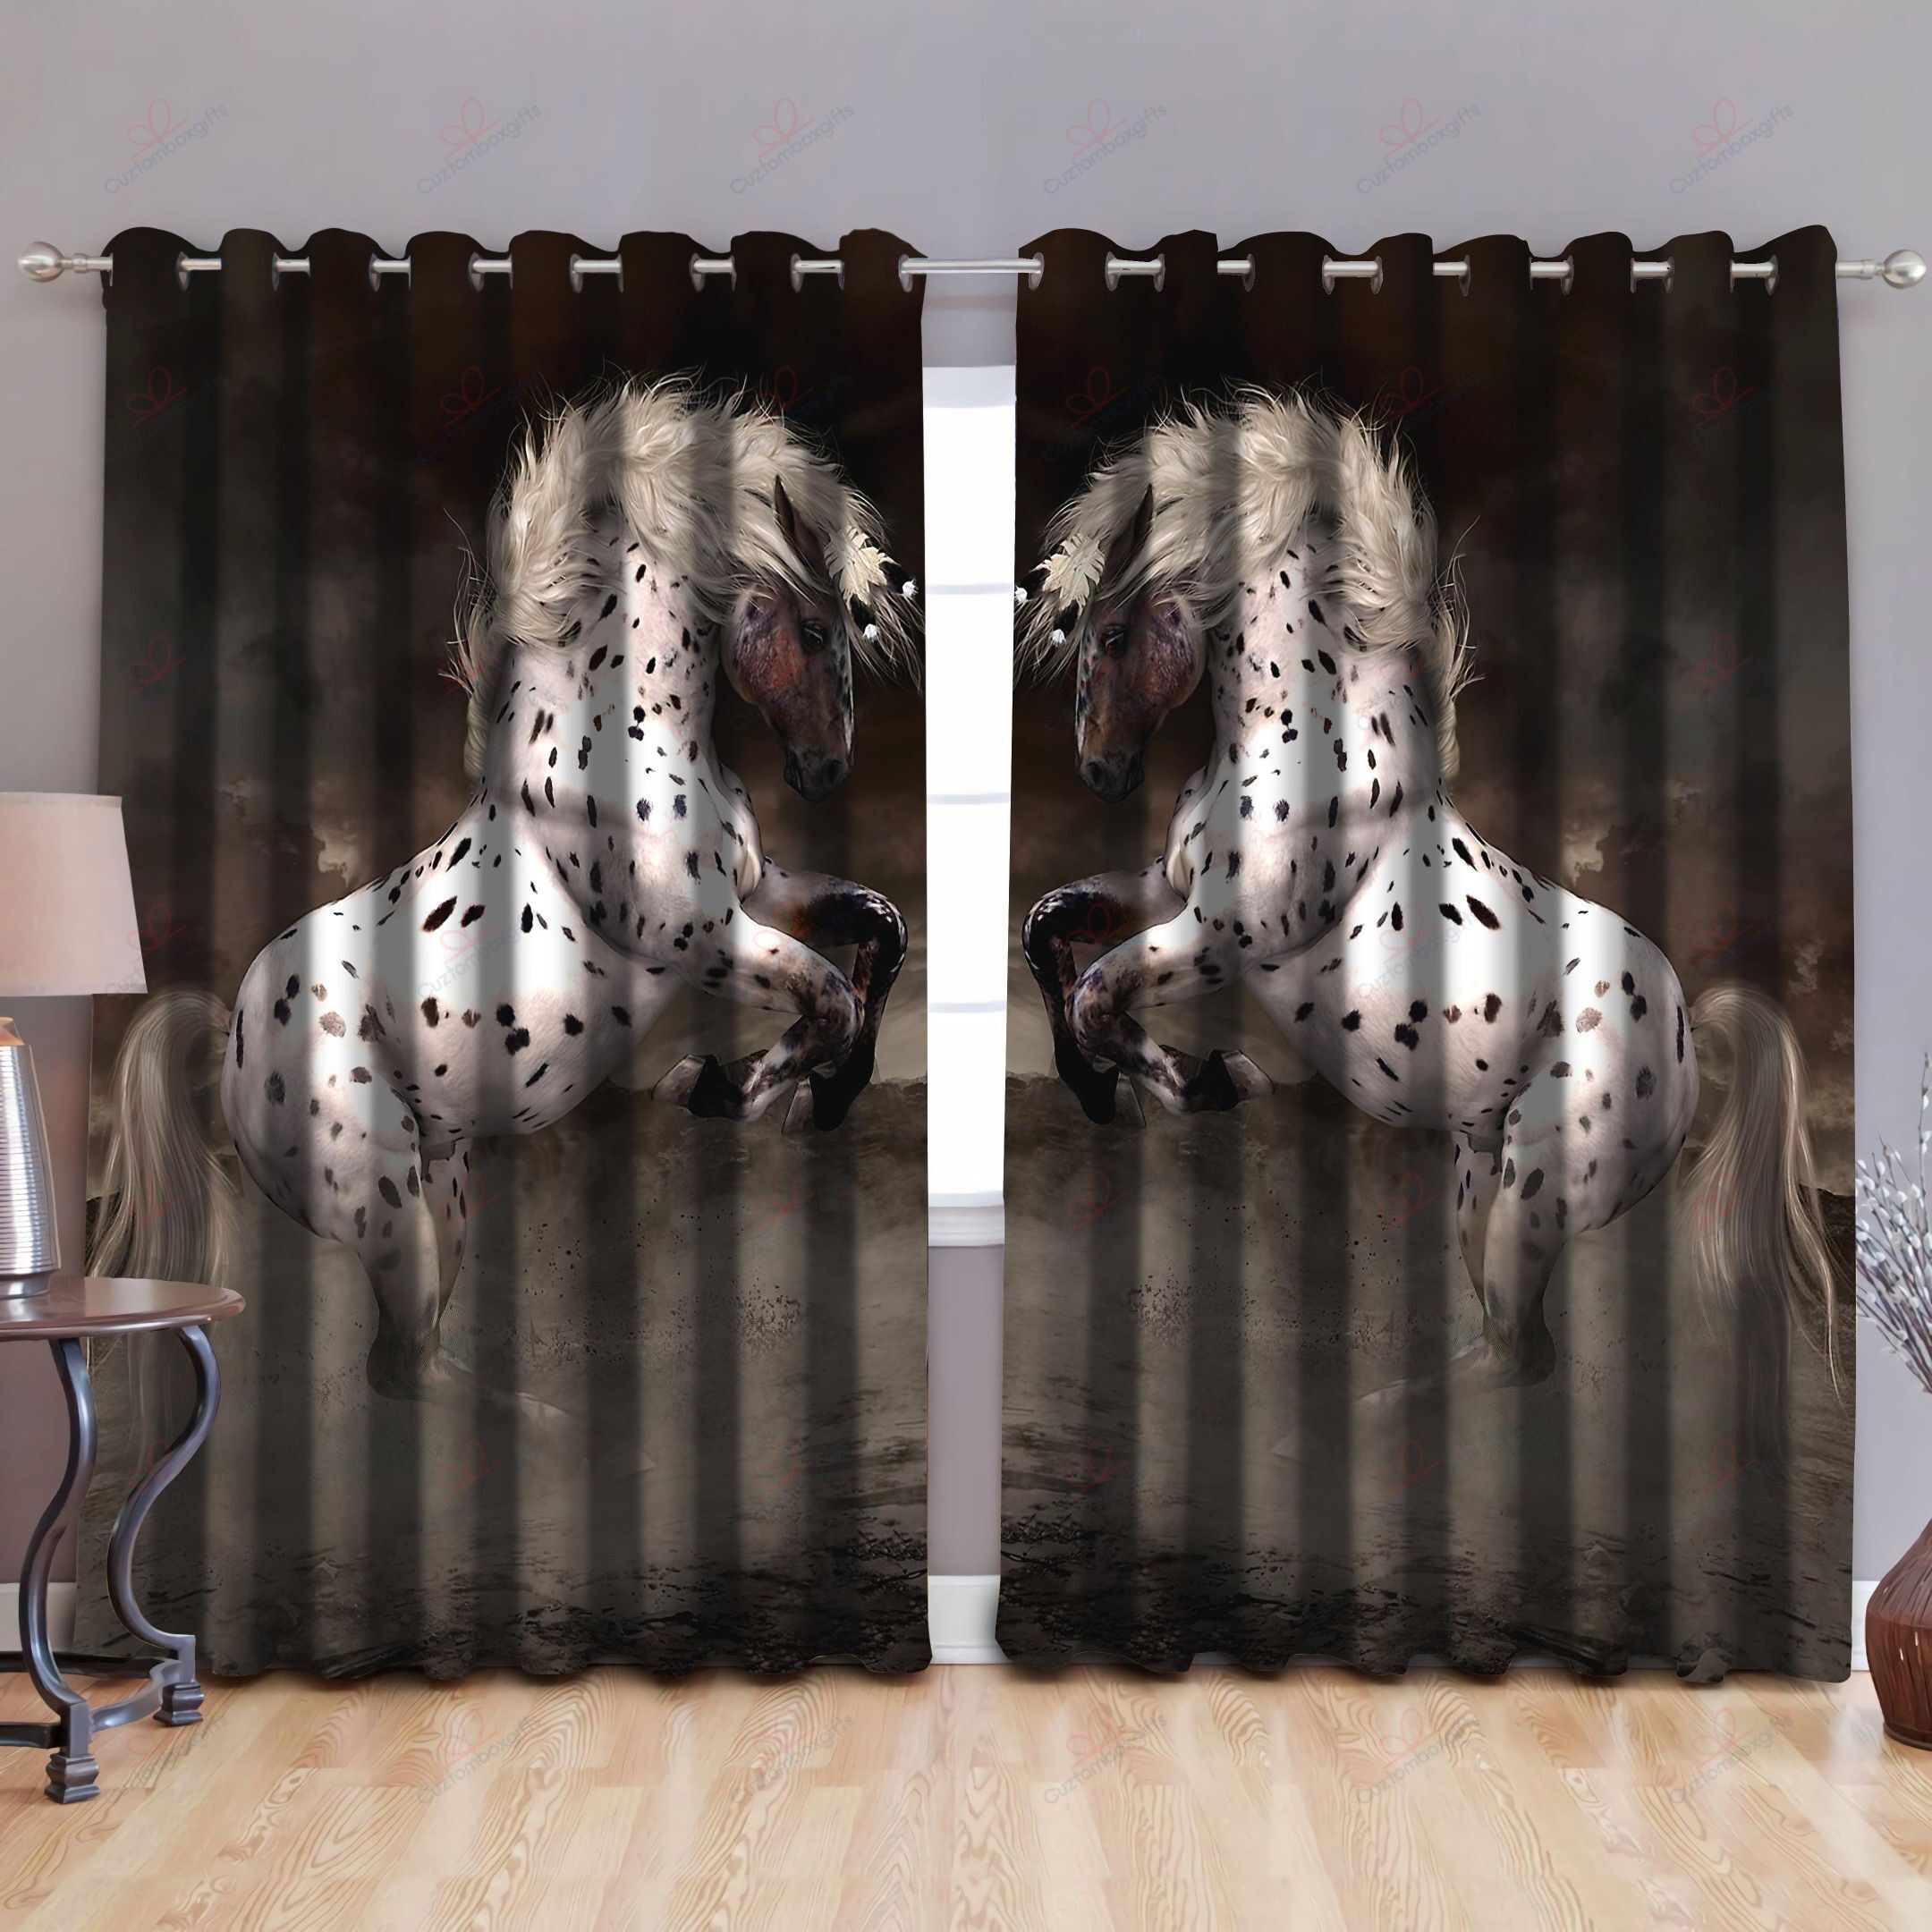 Black And White Dot Horse Art Printed Window Curtain Home Decor